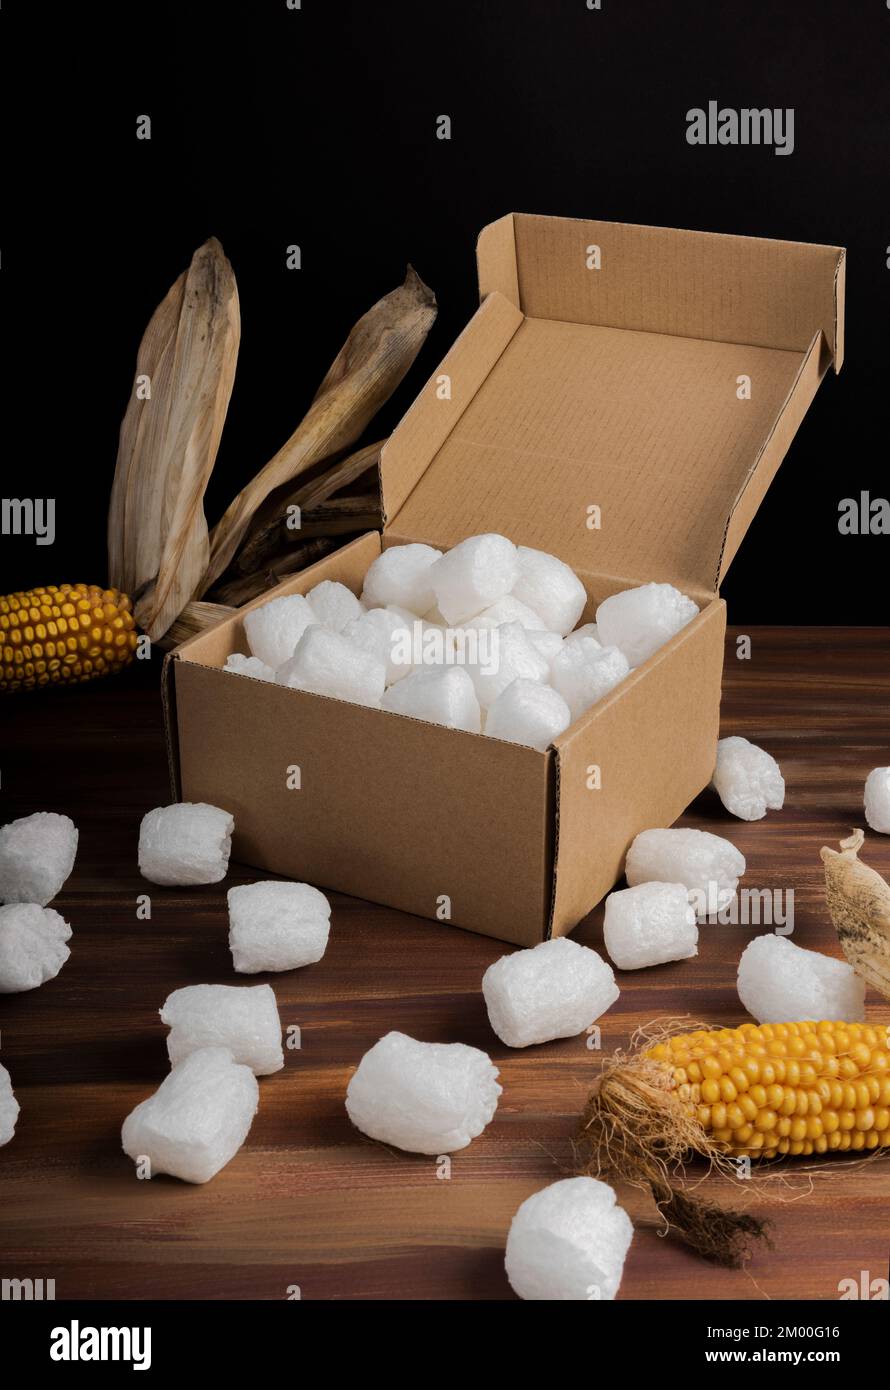 https://c8.alamy.com/comp/2M00G16/ecological-biodegradable-corn-packaging-and-cardboad-box-for-ecommerce-2M00G16.jpg